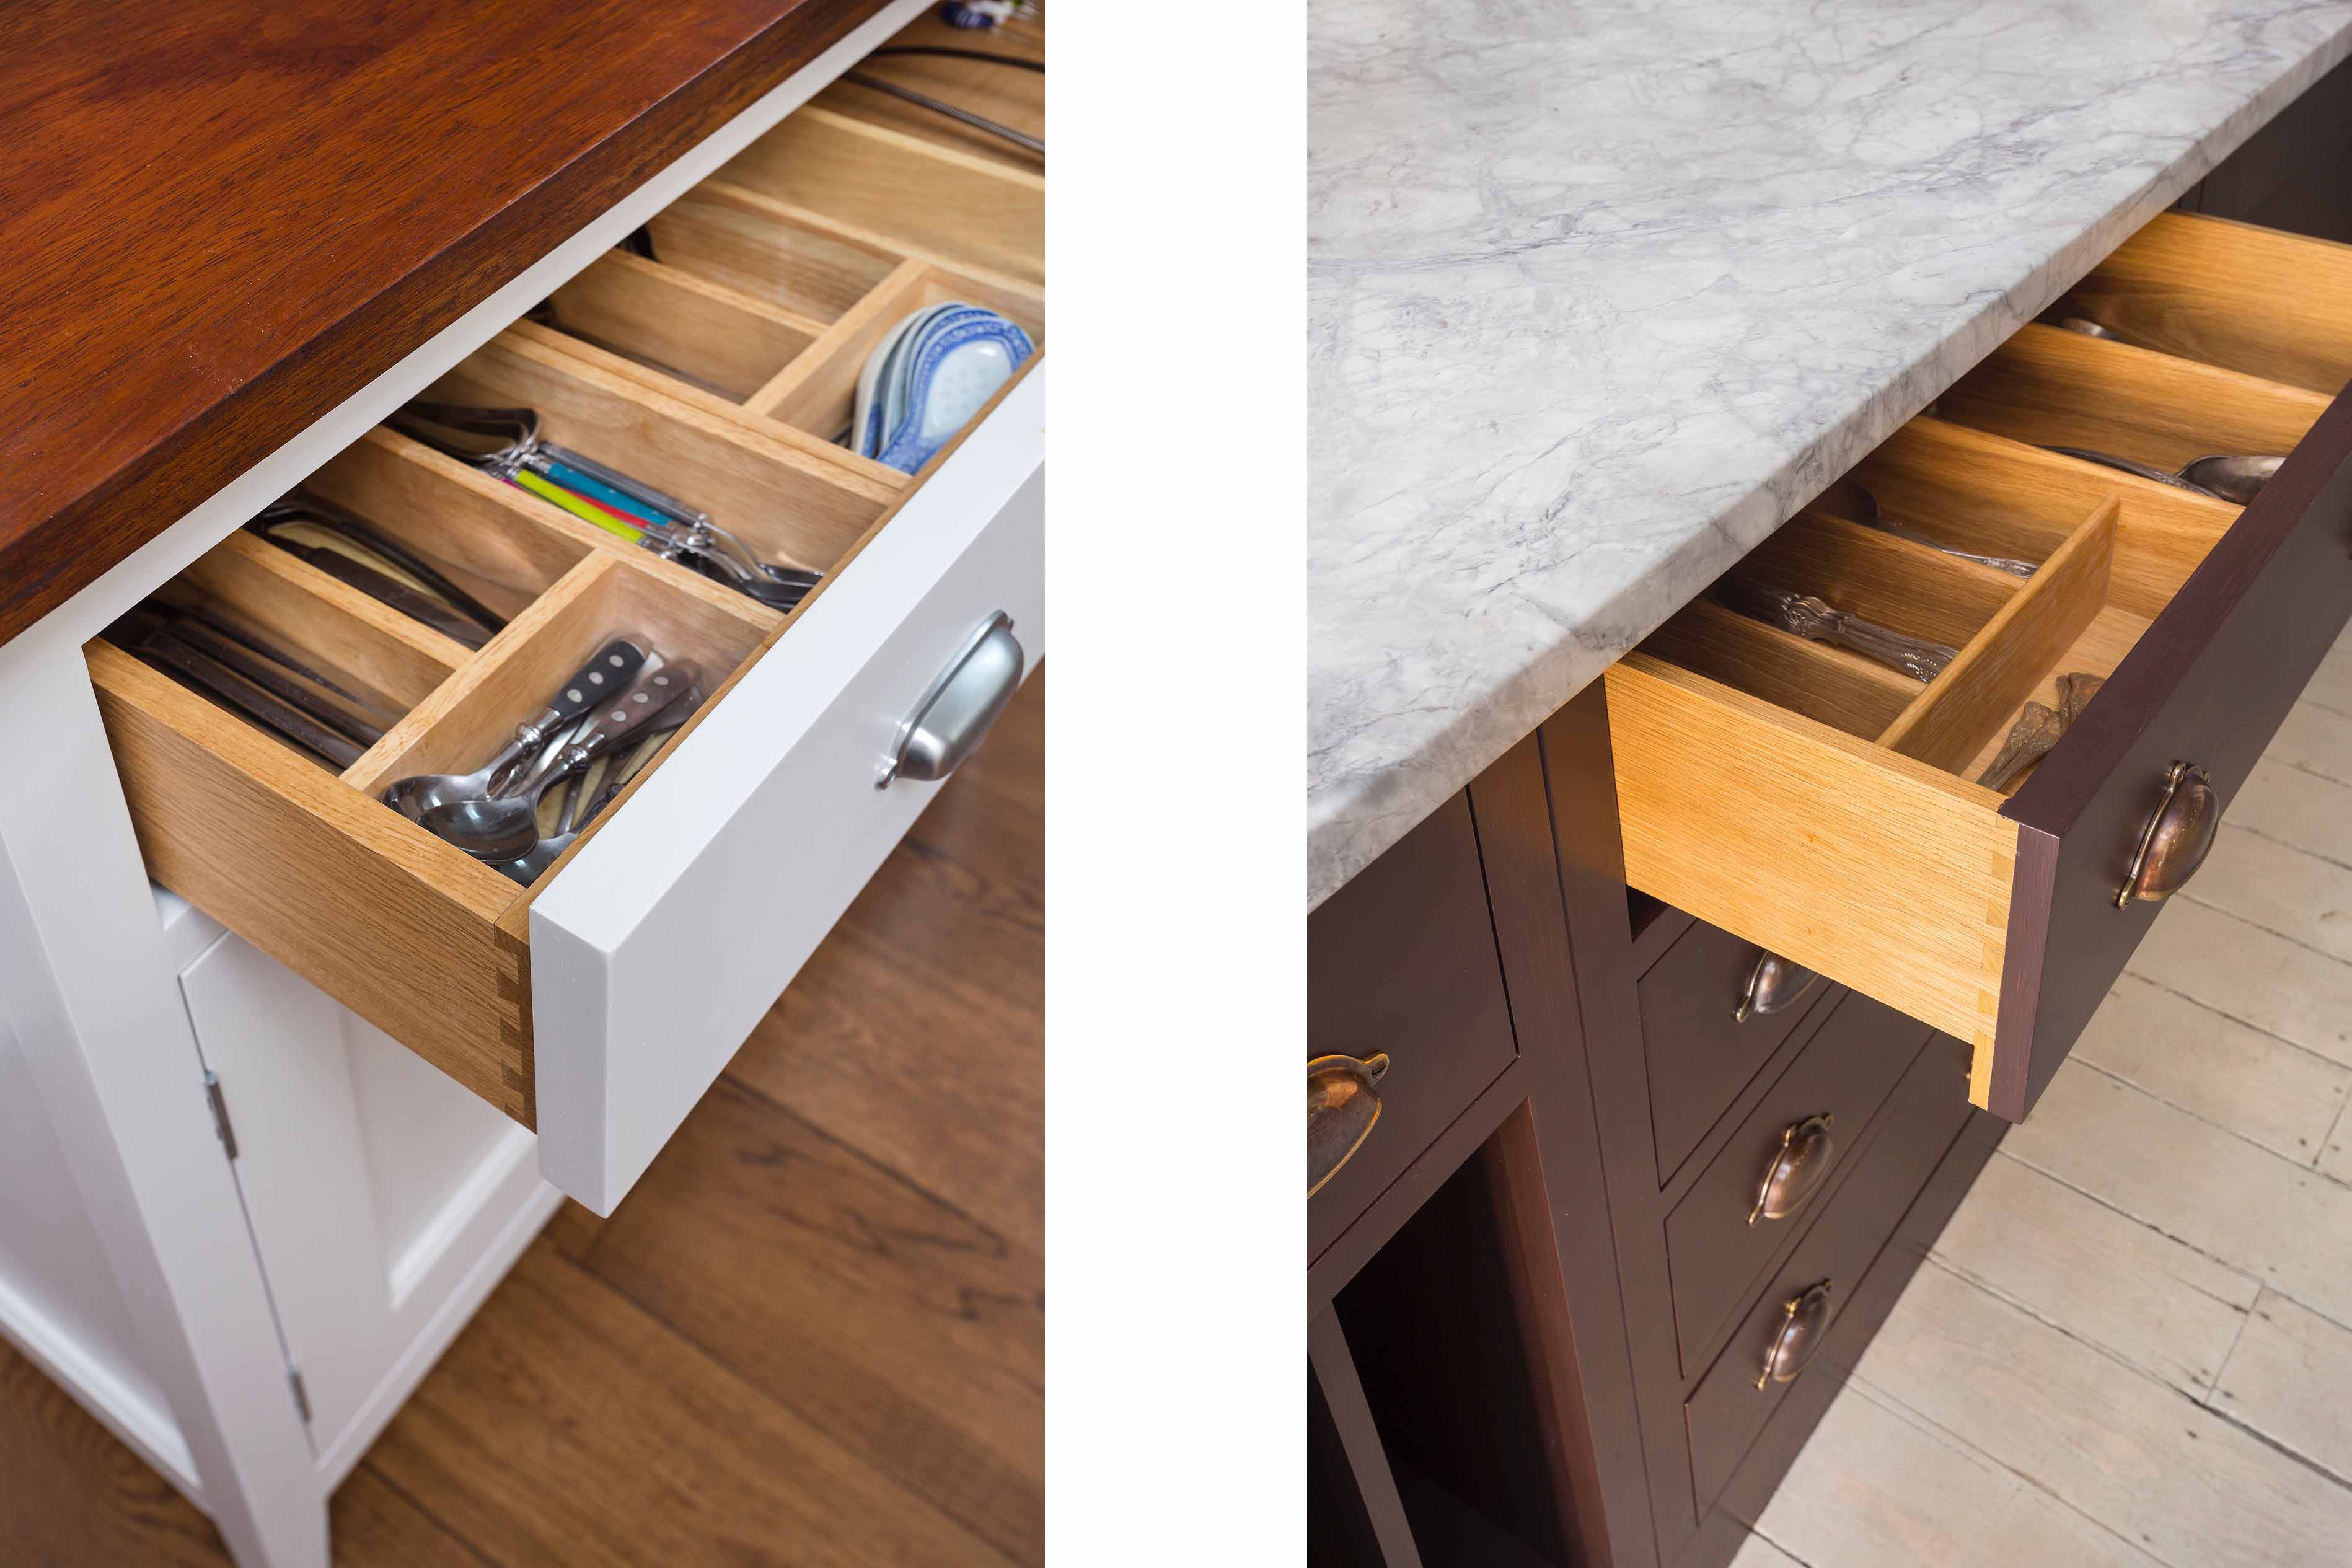 001. Bespoke kitchen shaker style oak cutlery utensil partitioned divider tray Armac Martin Farrow and Ball Winchester, Hampshire